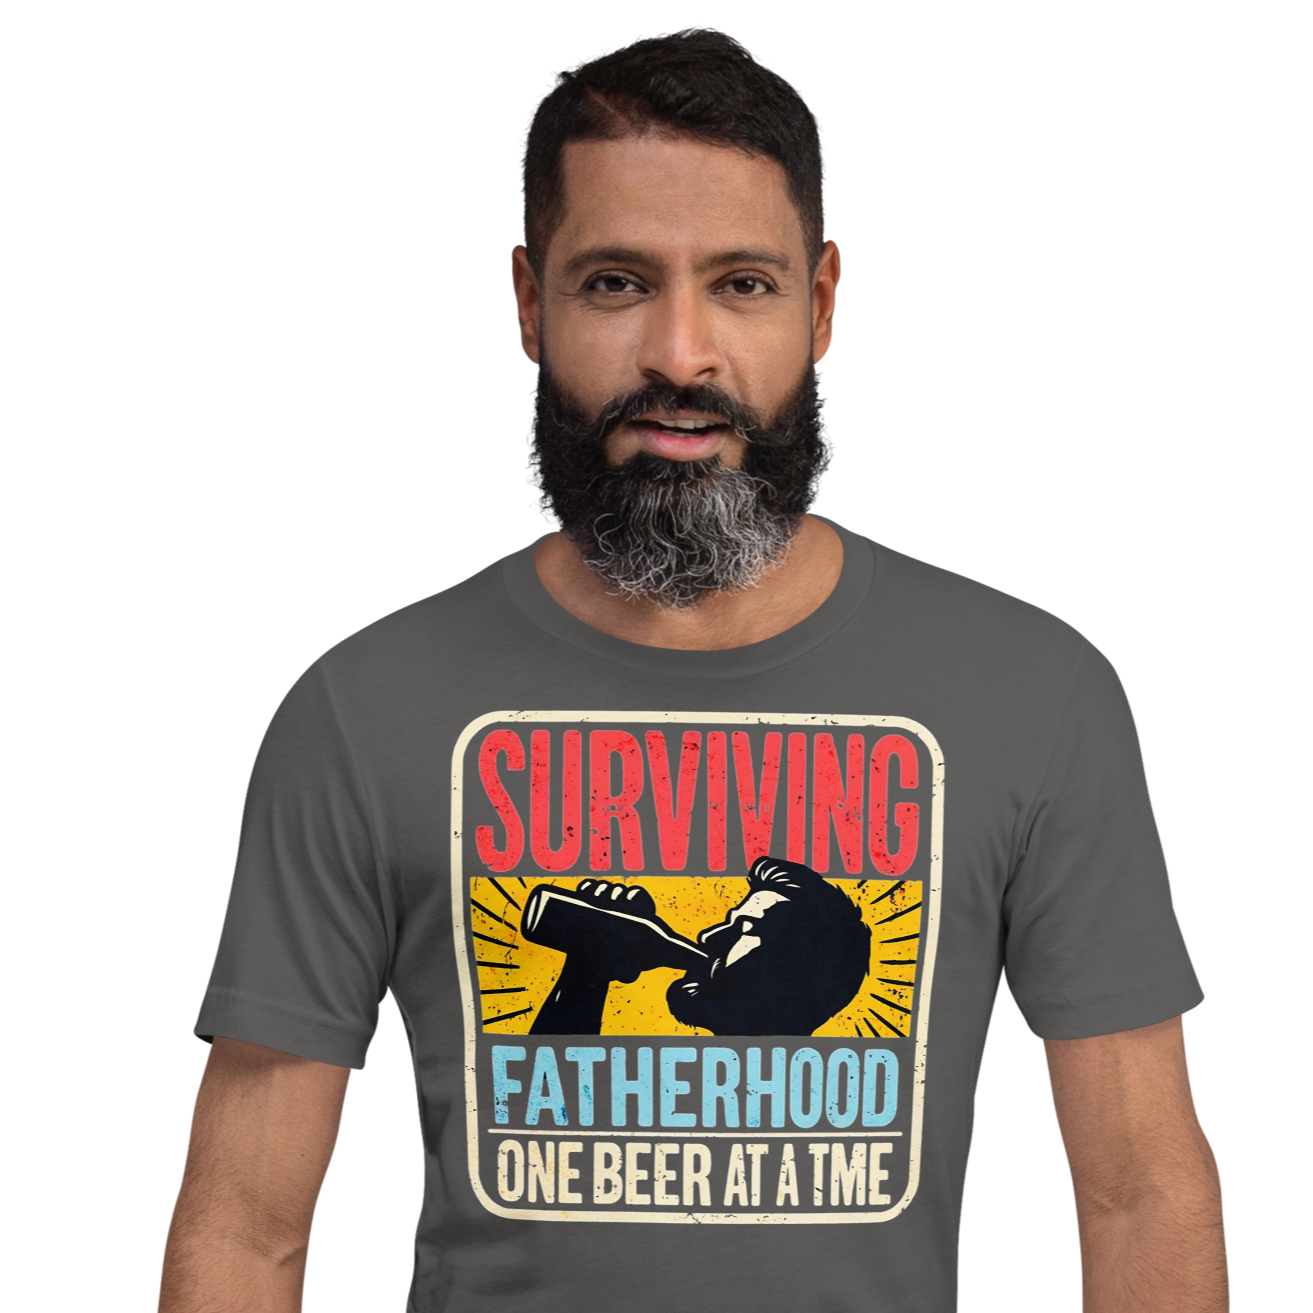 Celebrate fatherhood with our "Surviving Fatherhood One Beer at a Time" t-shirt. Perfect gift for dads who love a cold one. Ideal for Father's Day or birthdays.